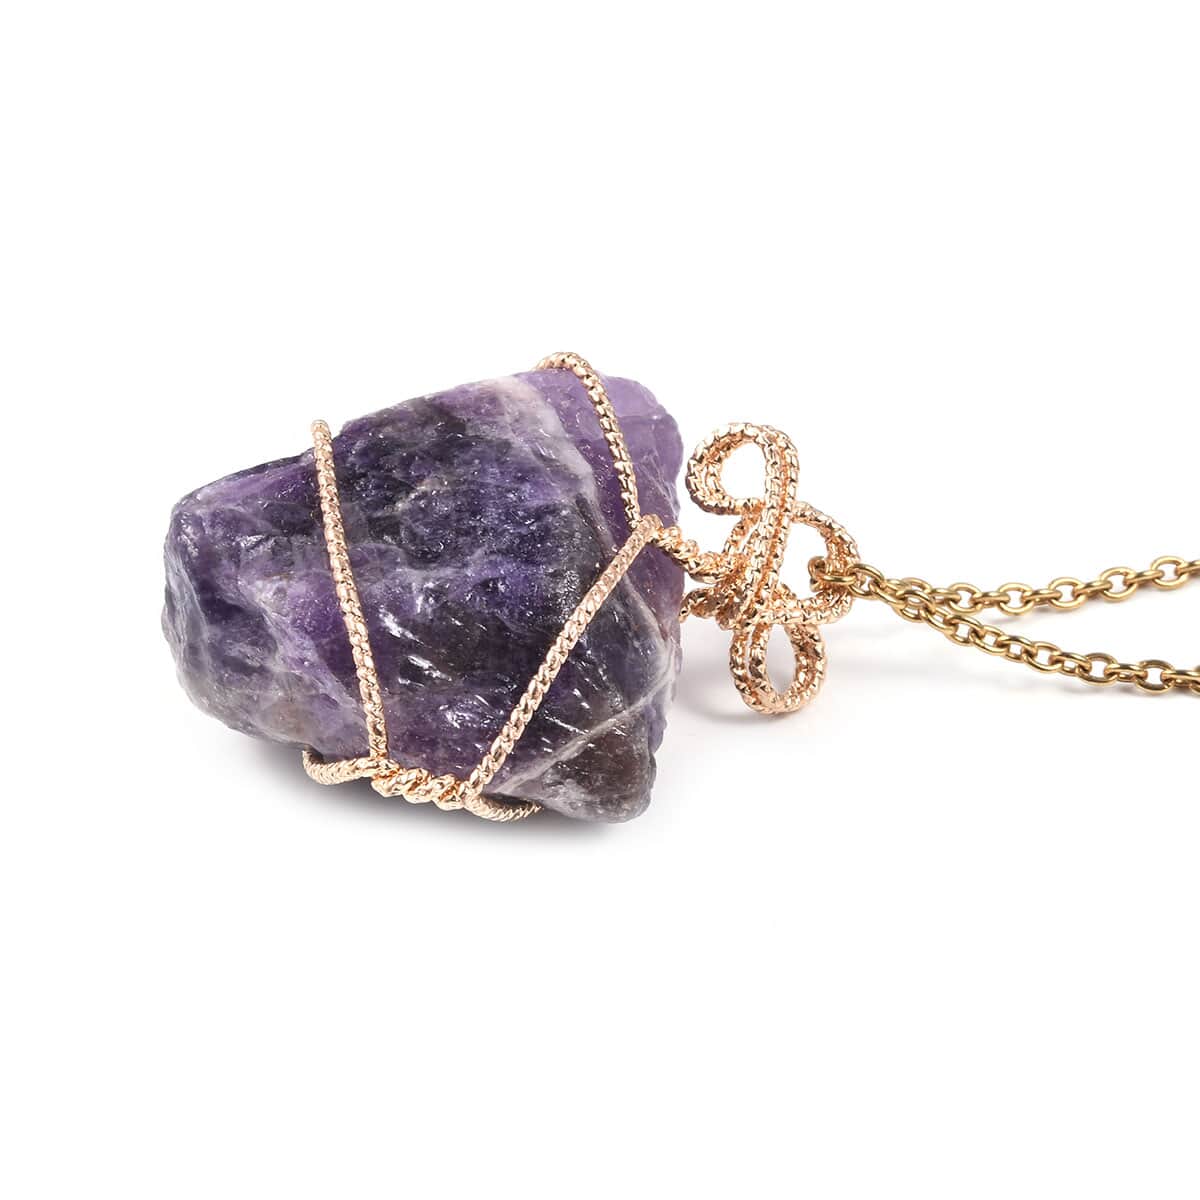 Set of 2 Amethyst and Galilea Rose Quartz Wire Wrapped Pendants Necklace 24 Inches in Goldtone 230.00 ctw  image number 2